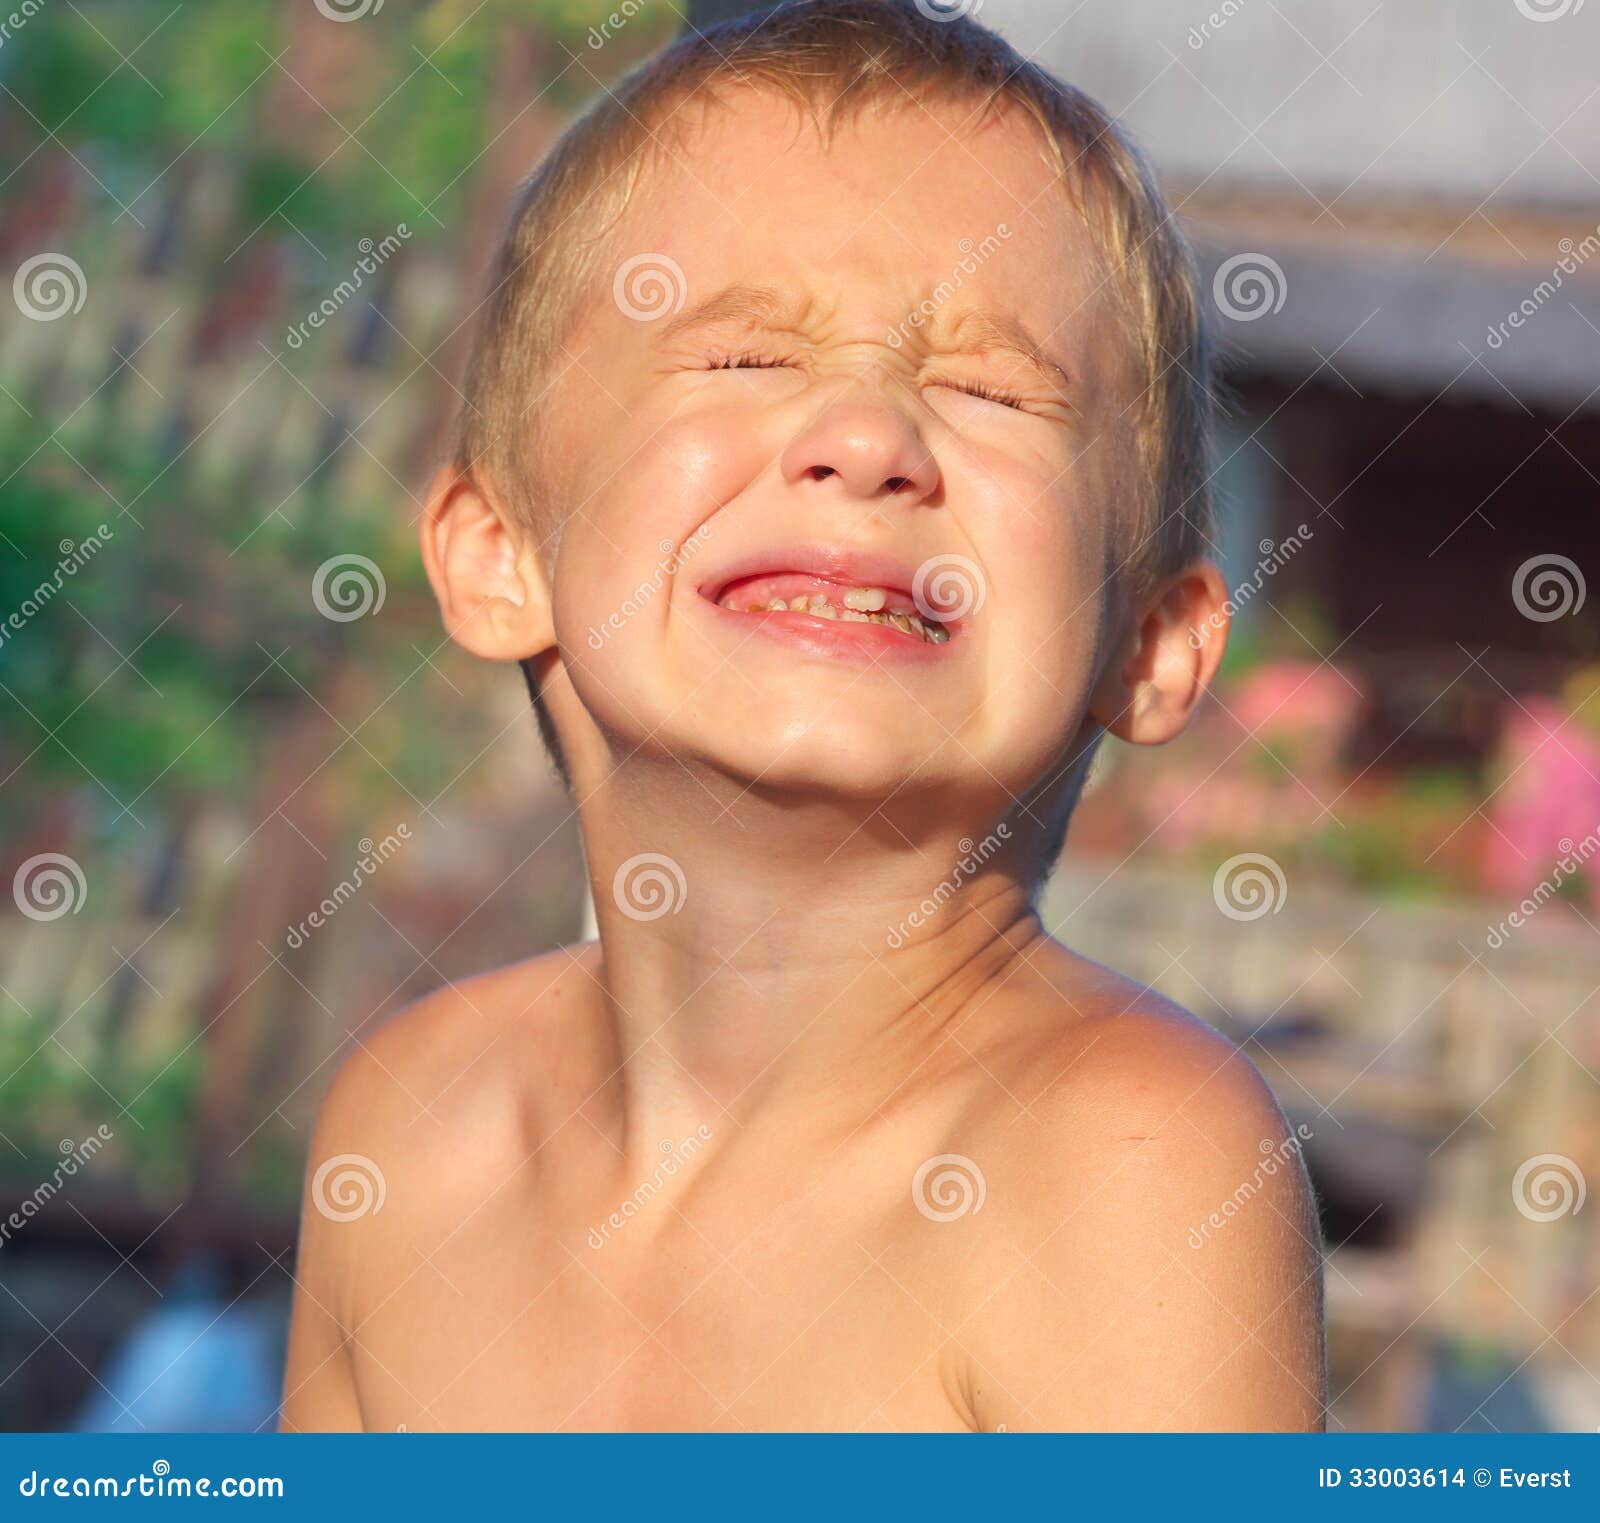 child boy making sore crying faces showing calf's teeth decay